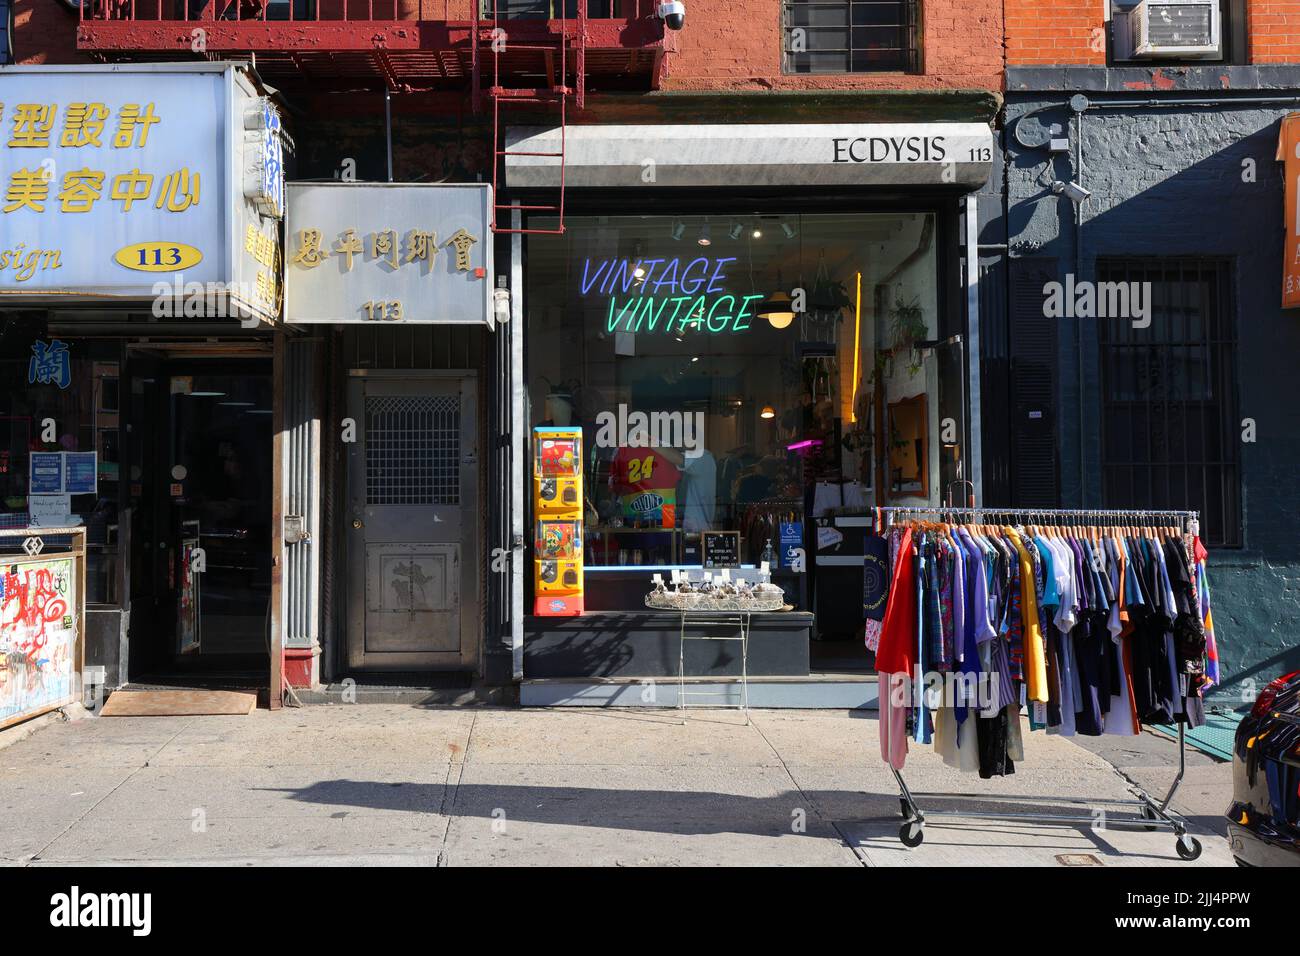 ECDYSIS, 113 Division St, New York, NY. exterior storefront of a vintage clothing store in Manhattan's 'Dimes Square' Chinatown/Lower East Side Stock Photo